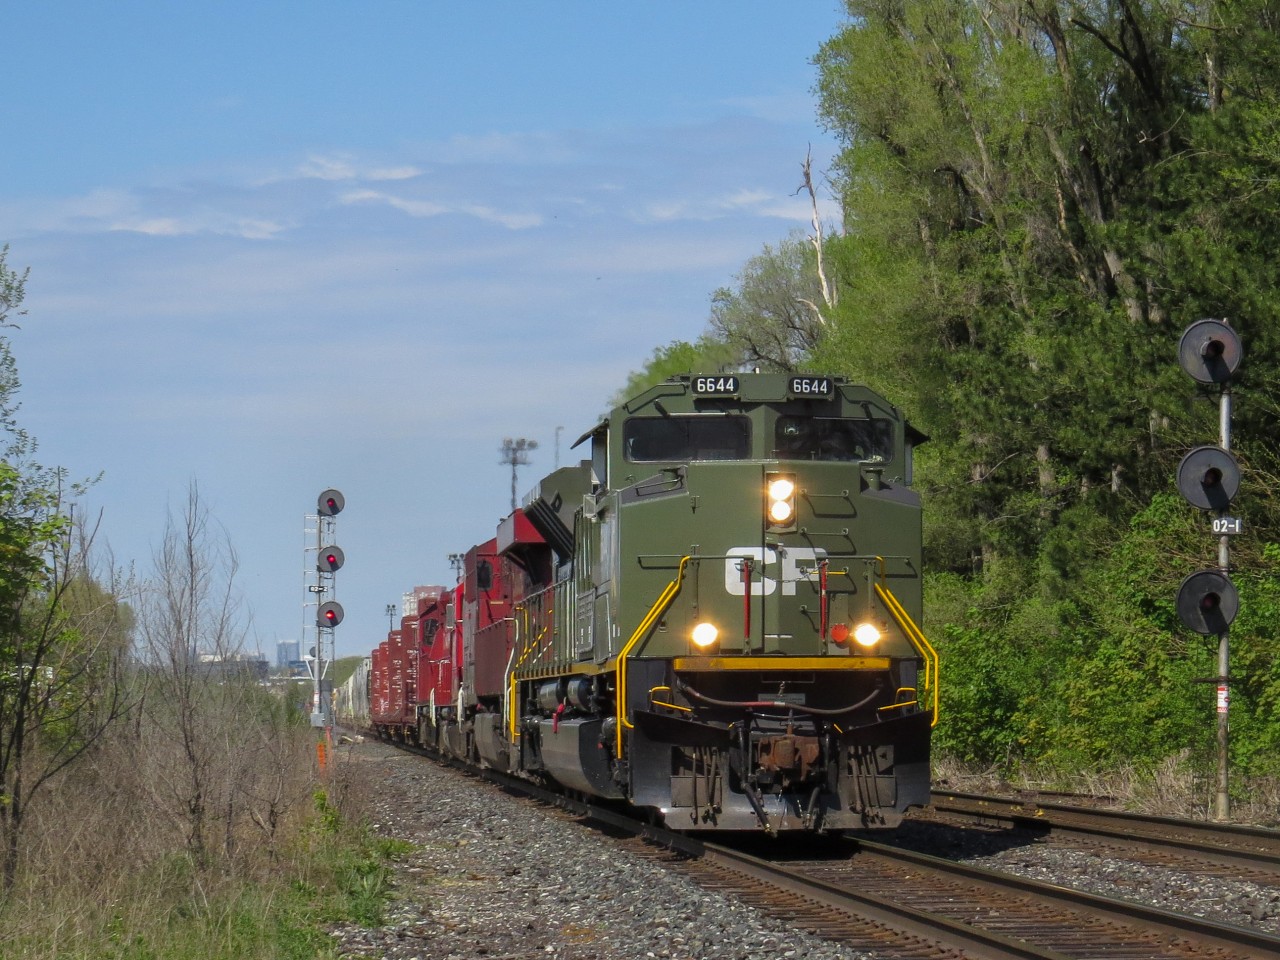 CP 2-421-24 hauls westbound through Leaside with CP D-Day commemorative locomotive 6644 leading the way. CP 8938, CP 3119, and CP 3134 trail. The 2 GP38-2s were dropped in Spence.